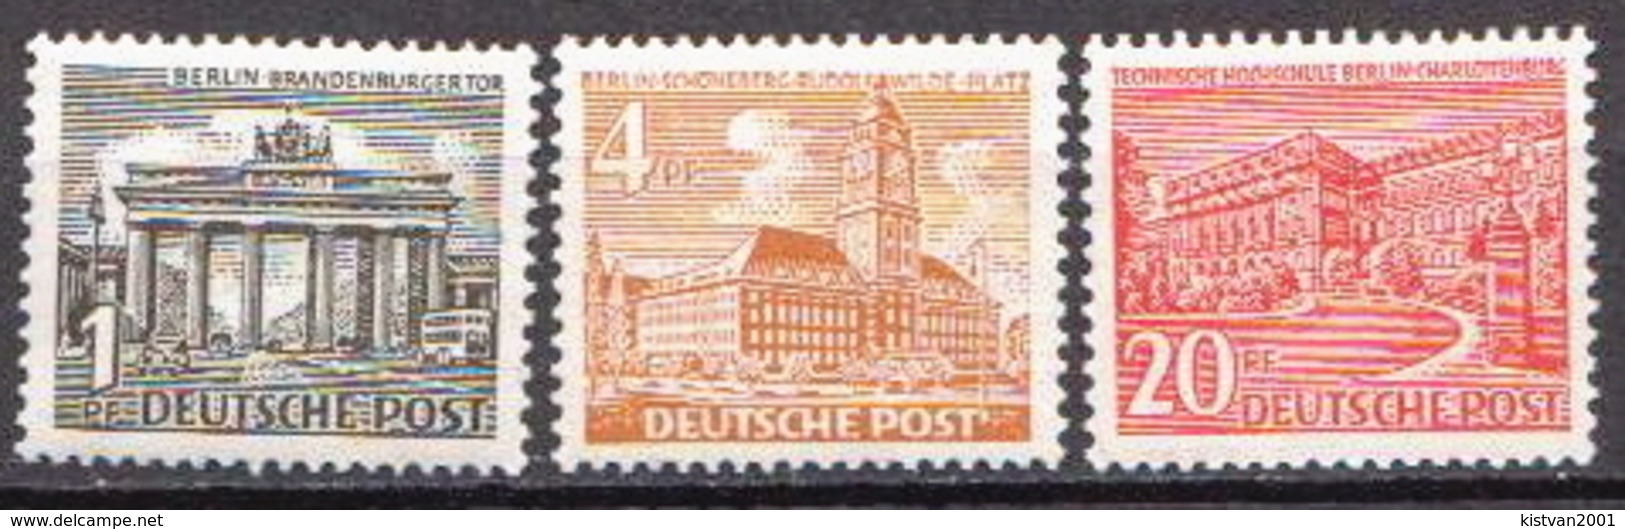 Germany / Berlin MNH Stamps - Unused Stamps